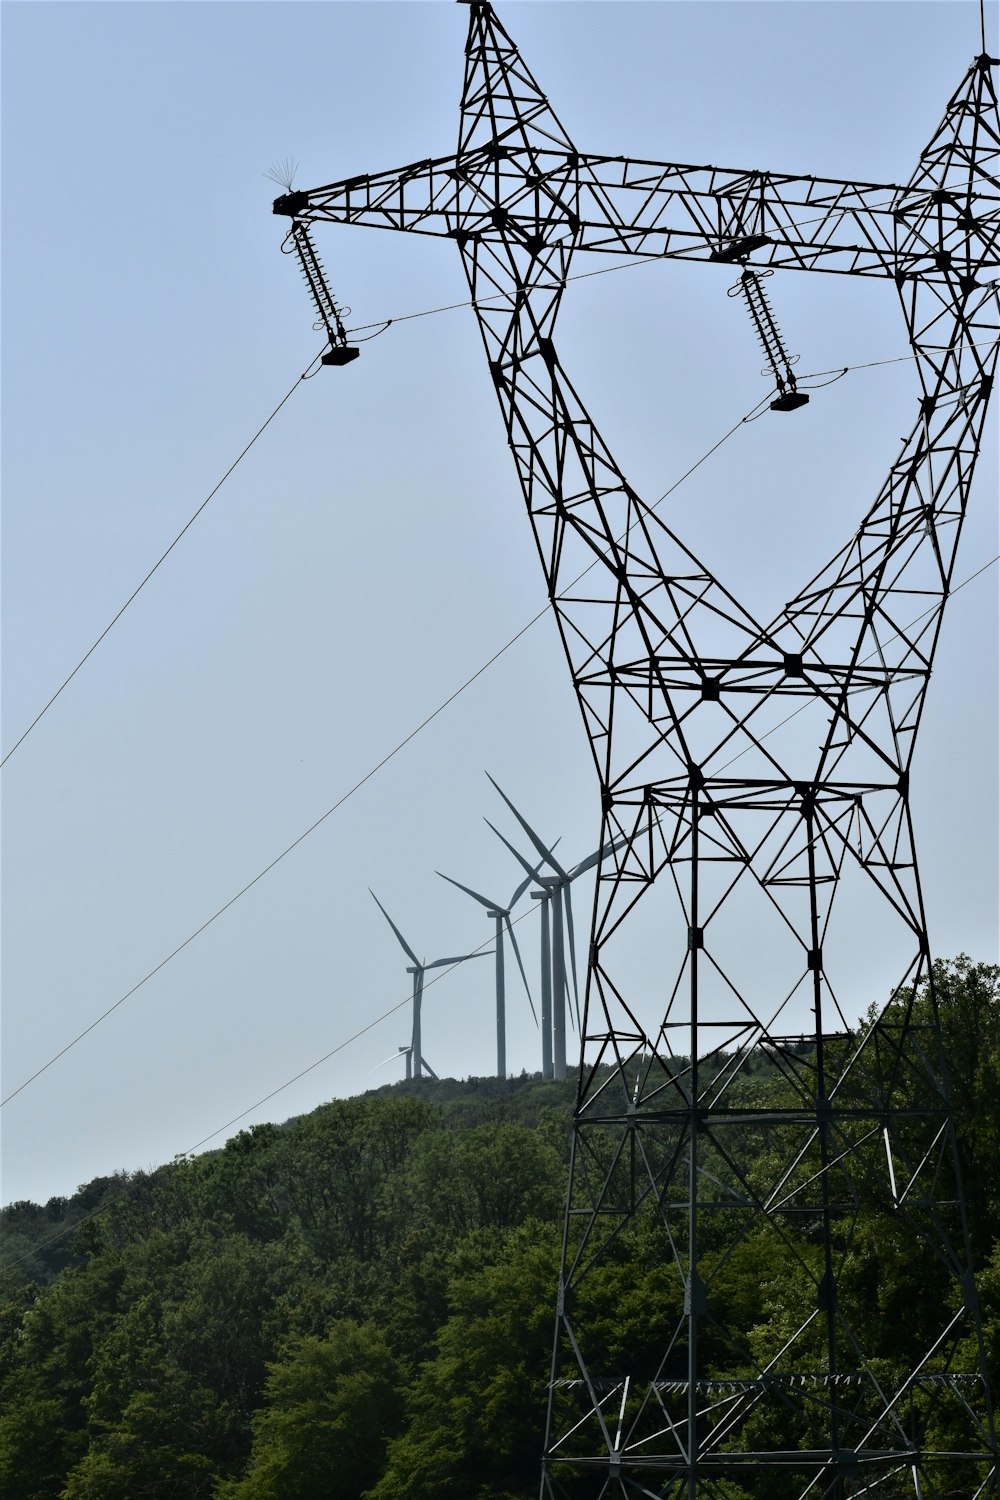 a group of power lines with wind turbines in the background